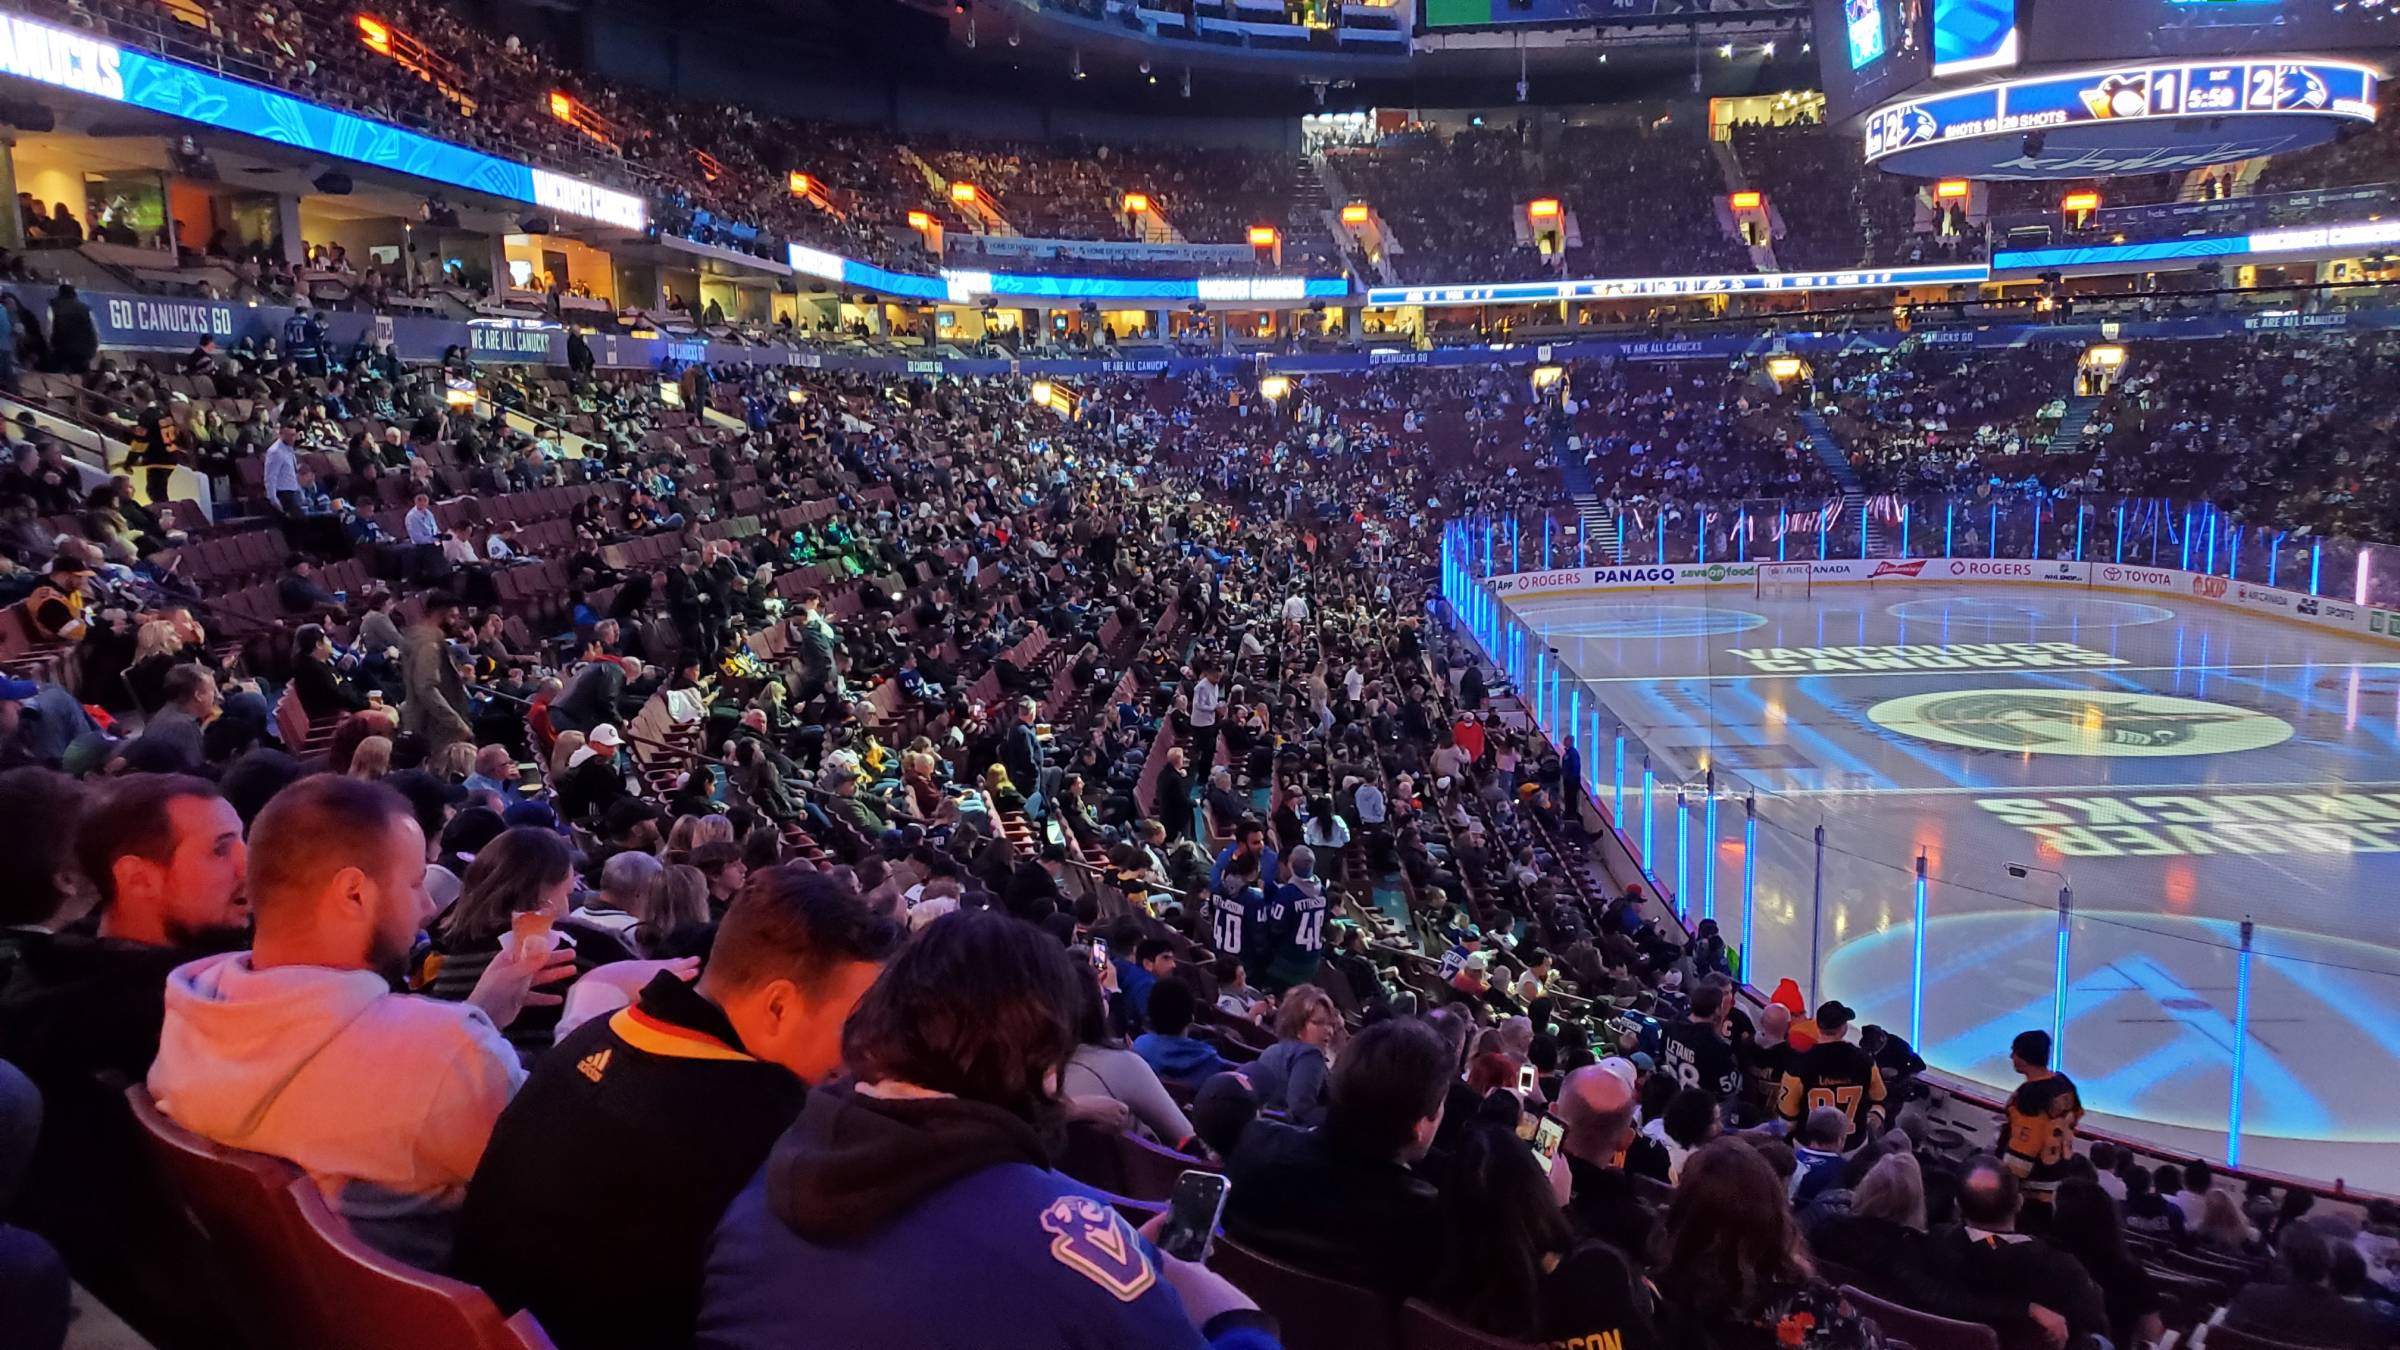 Section 118 at Rogers Arena